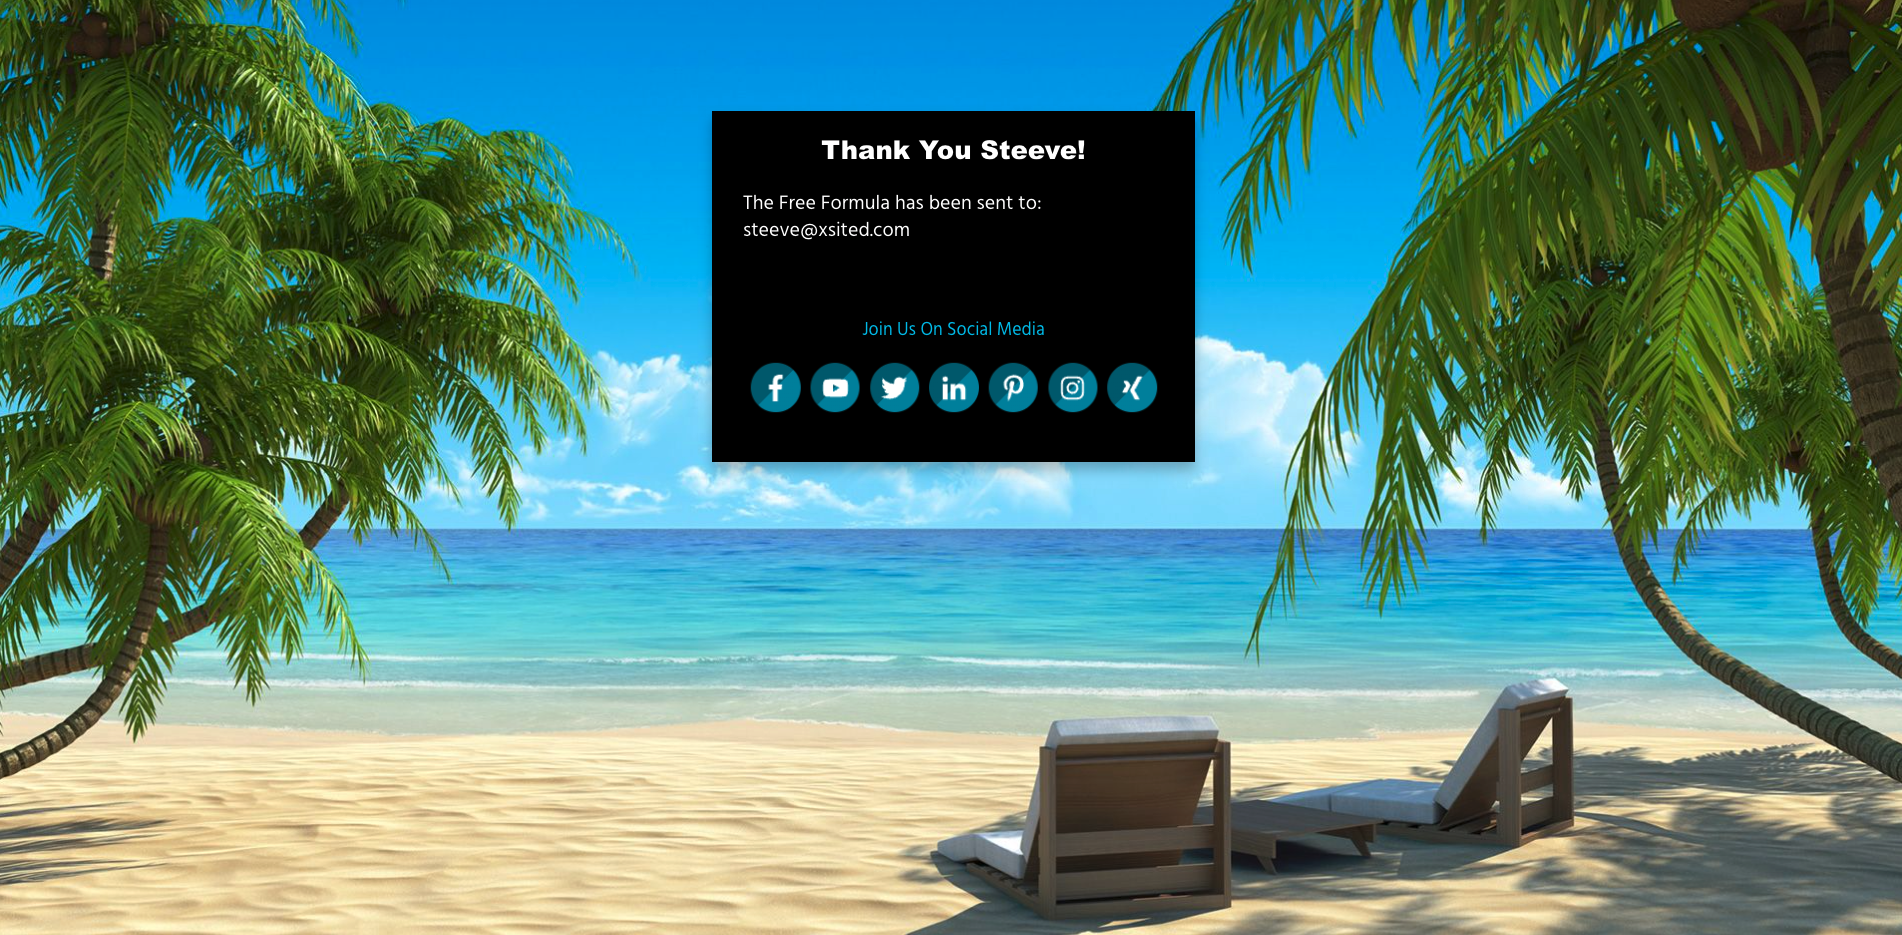 Beach Design Thank You Page Without Video